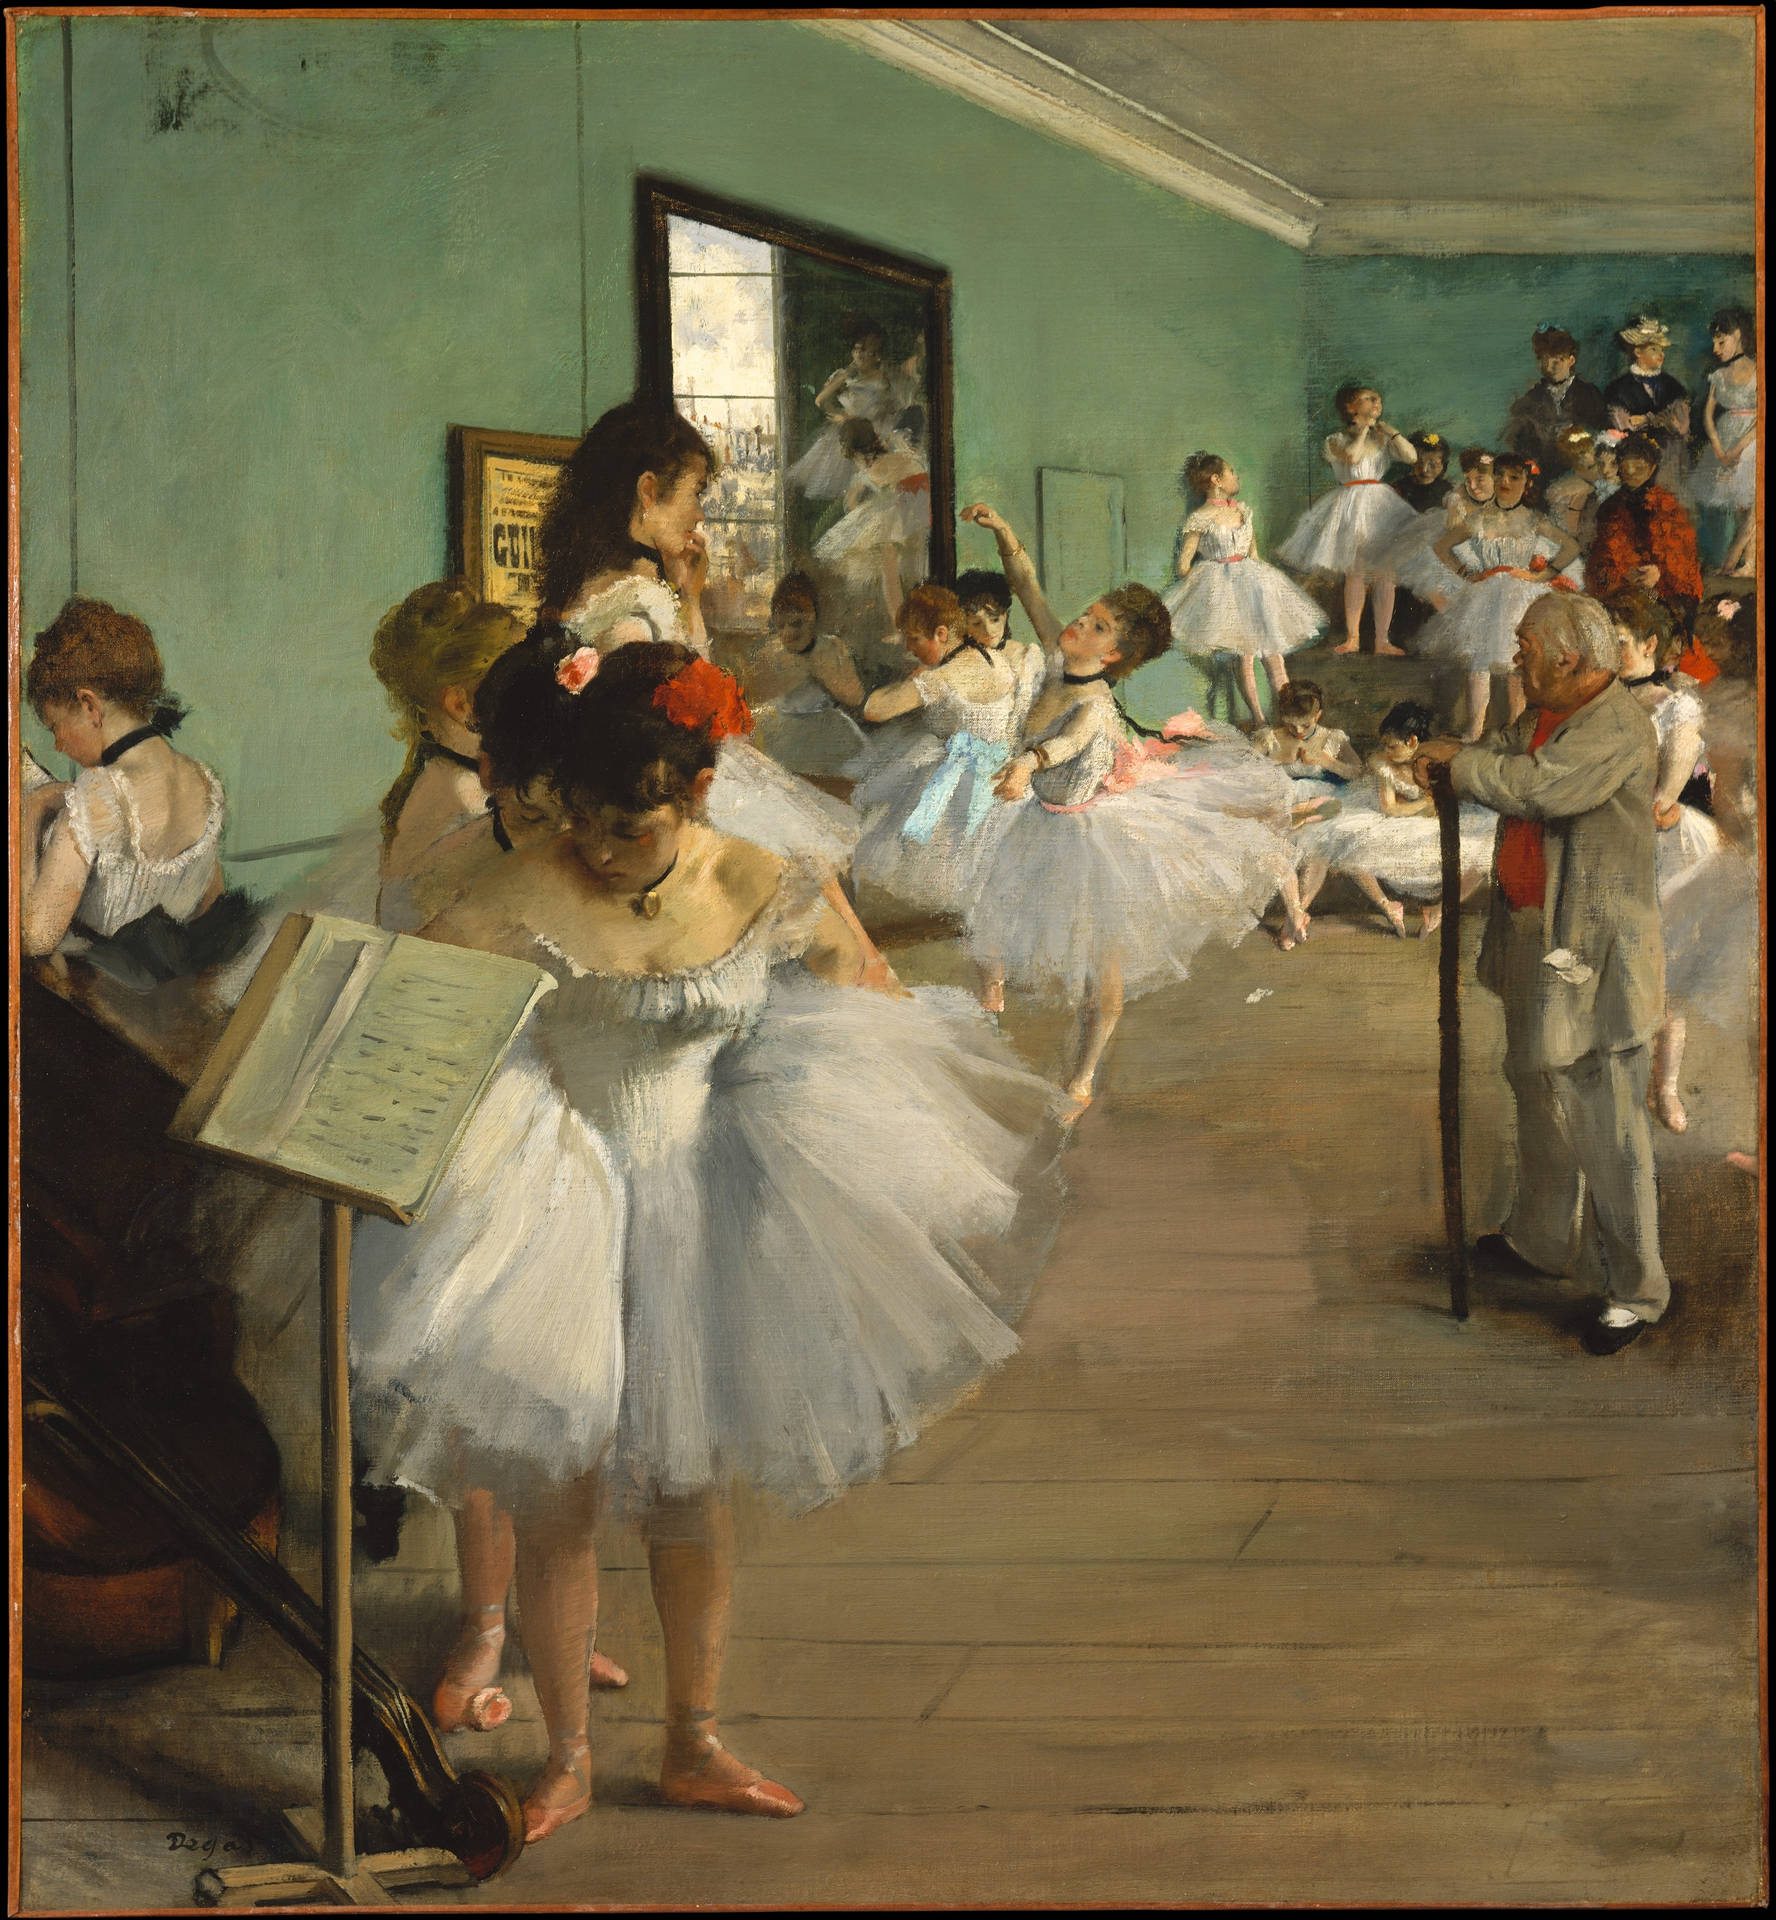 "Ethereal Impressionist Art of a Dance Class" Wallpaper